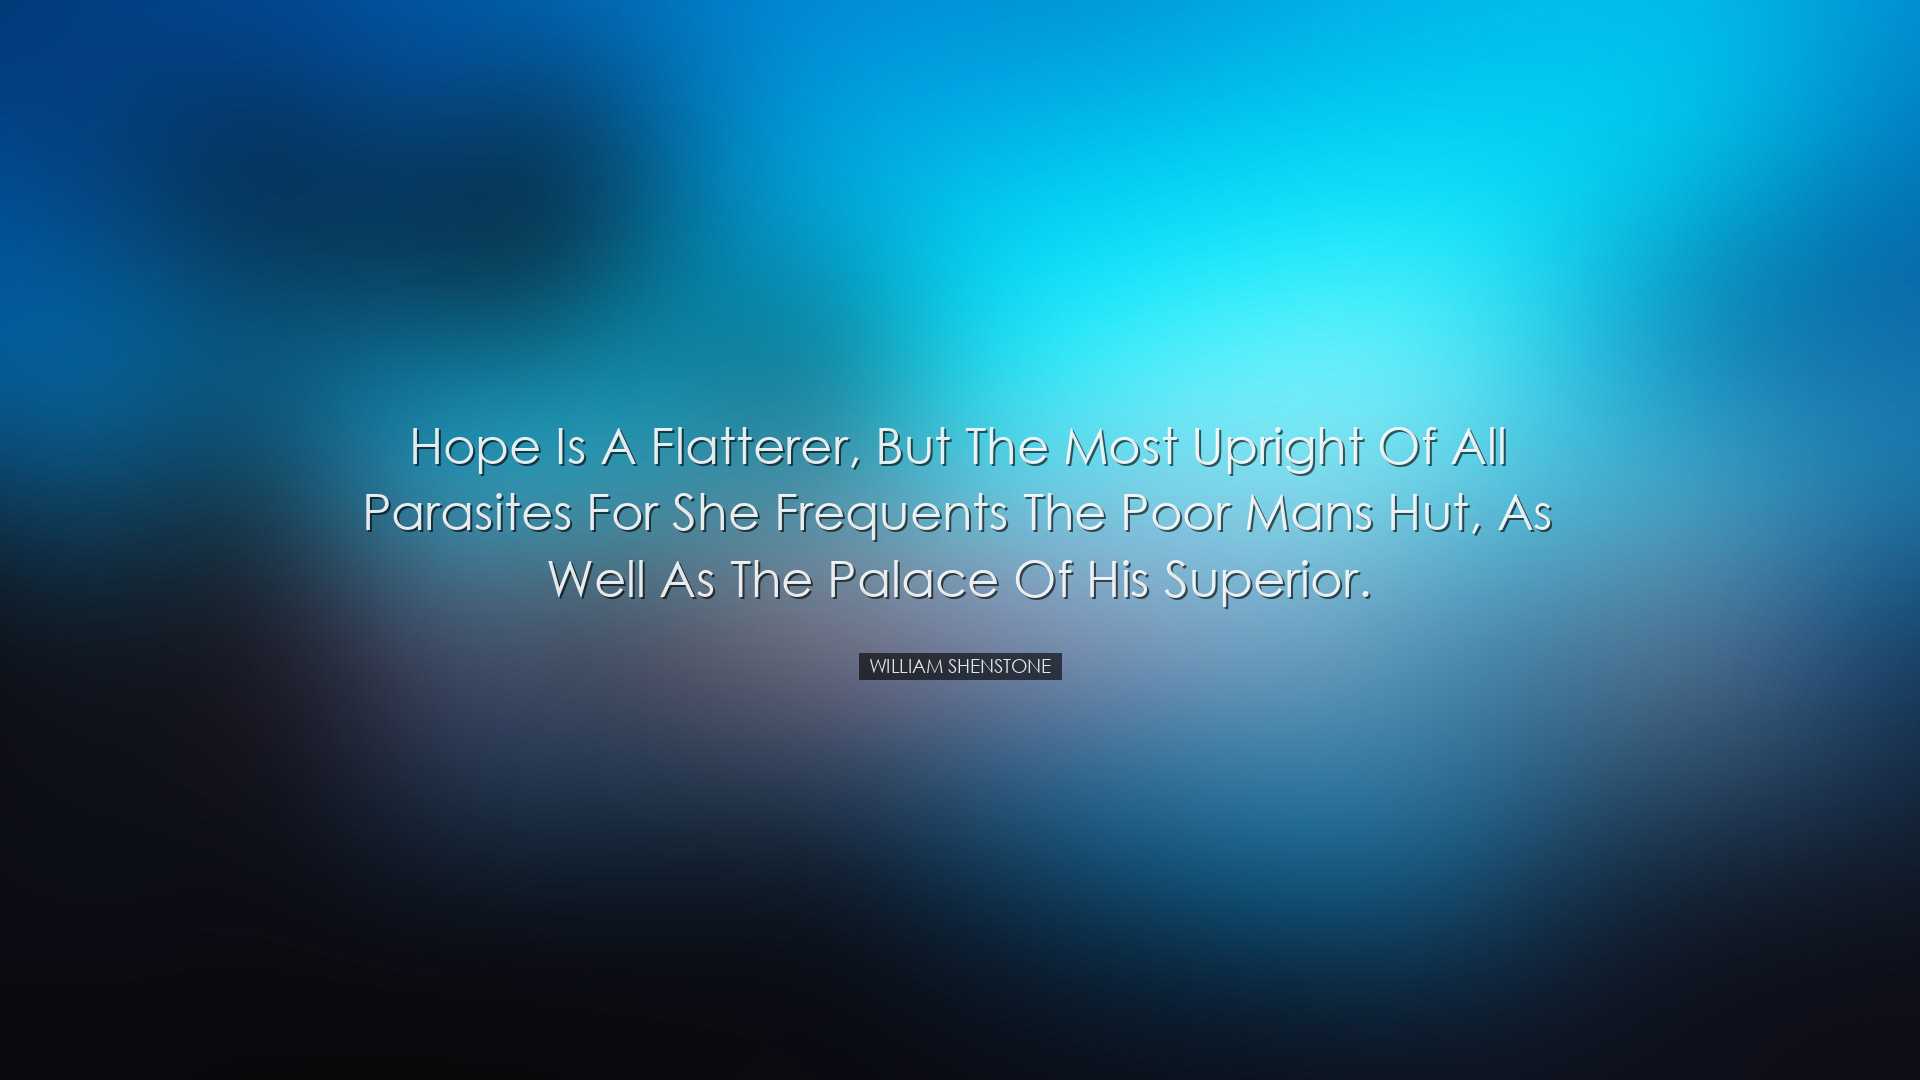 Hope is a flatterer, but the most upright of all parasites for she